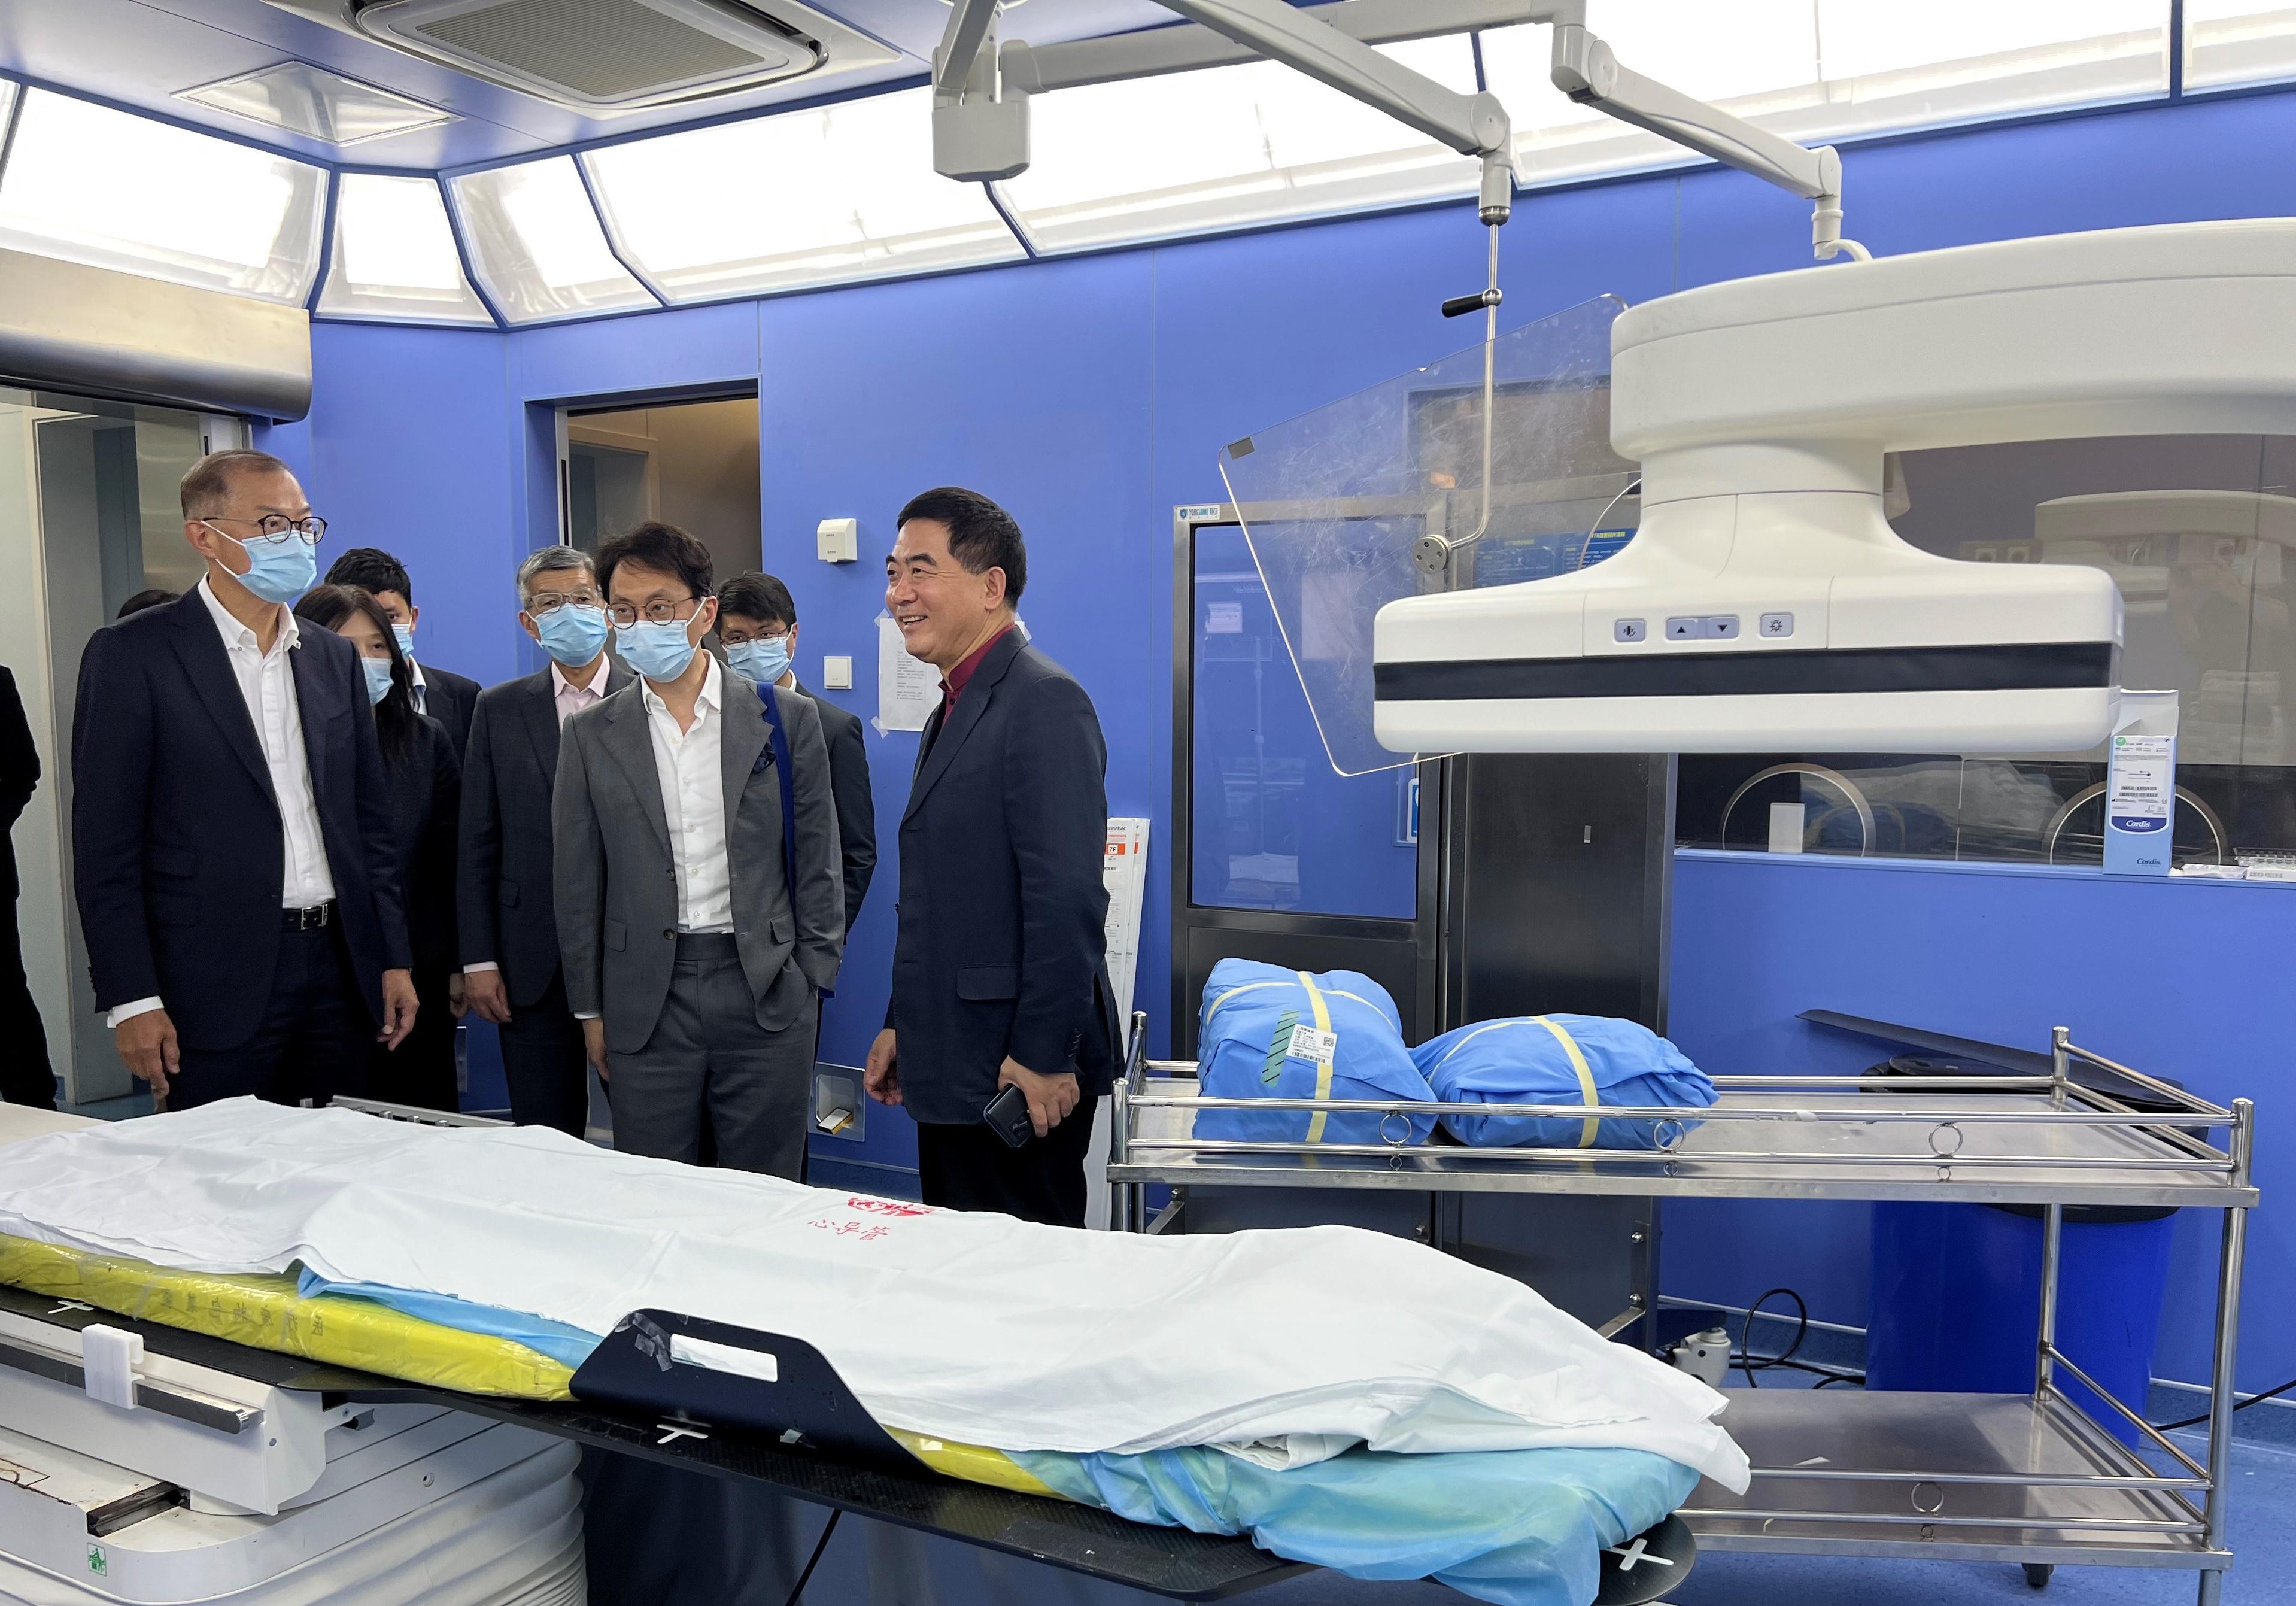 The Secretary for Health, Professor Lo Chung-mau (first left), toured the Center for Interventional Cardiology of Zhongshan Hospital affiliated to Fudan University today (June 10). Looking on are the Director of Cardiology Department of the hospital, Dr Ge Junbo (first right); the Director of Cluster Services of the Hospital Authority, Dr Simon Tang (fourth right); the Head of the Health Promotion Branch of the Department of Health, Dr Leung Yiu-hong (second right) and Clinical Professor of the Department of Medicine of School of Clinical Medicine of the University of Hong Kong, Professor Yiu Kai-hang (third right).